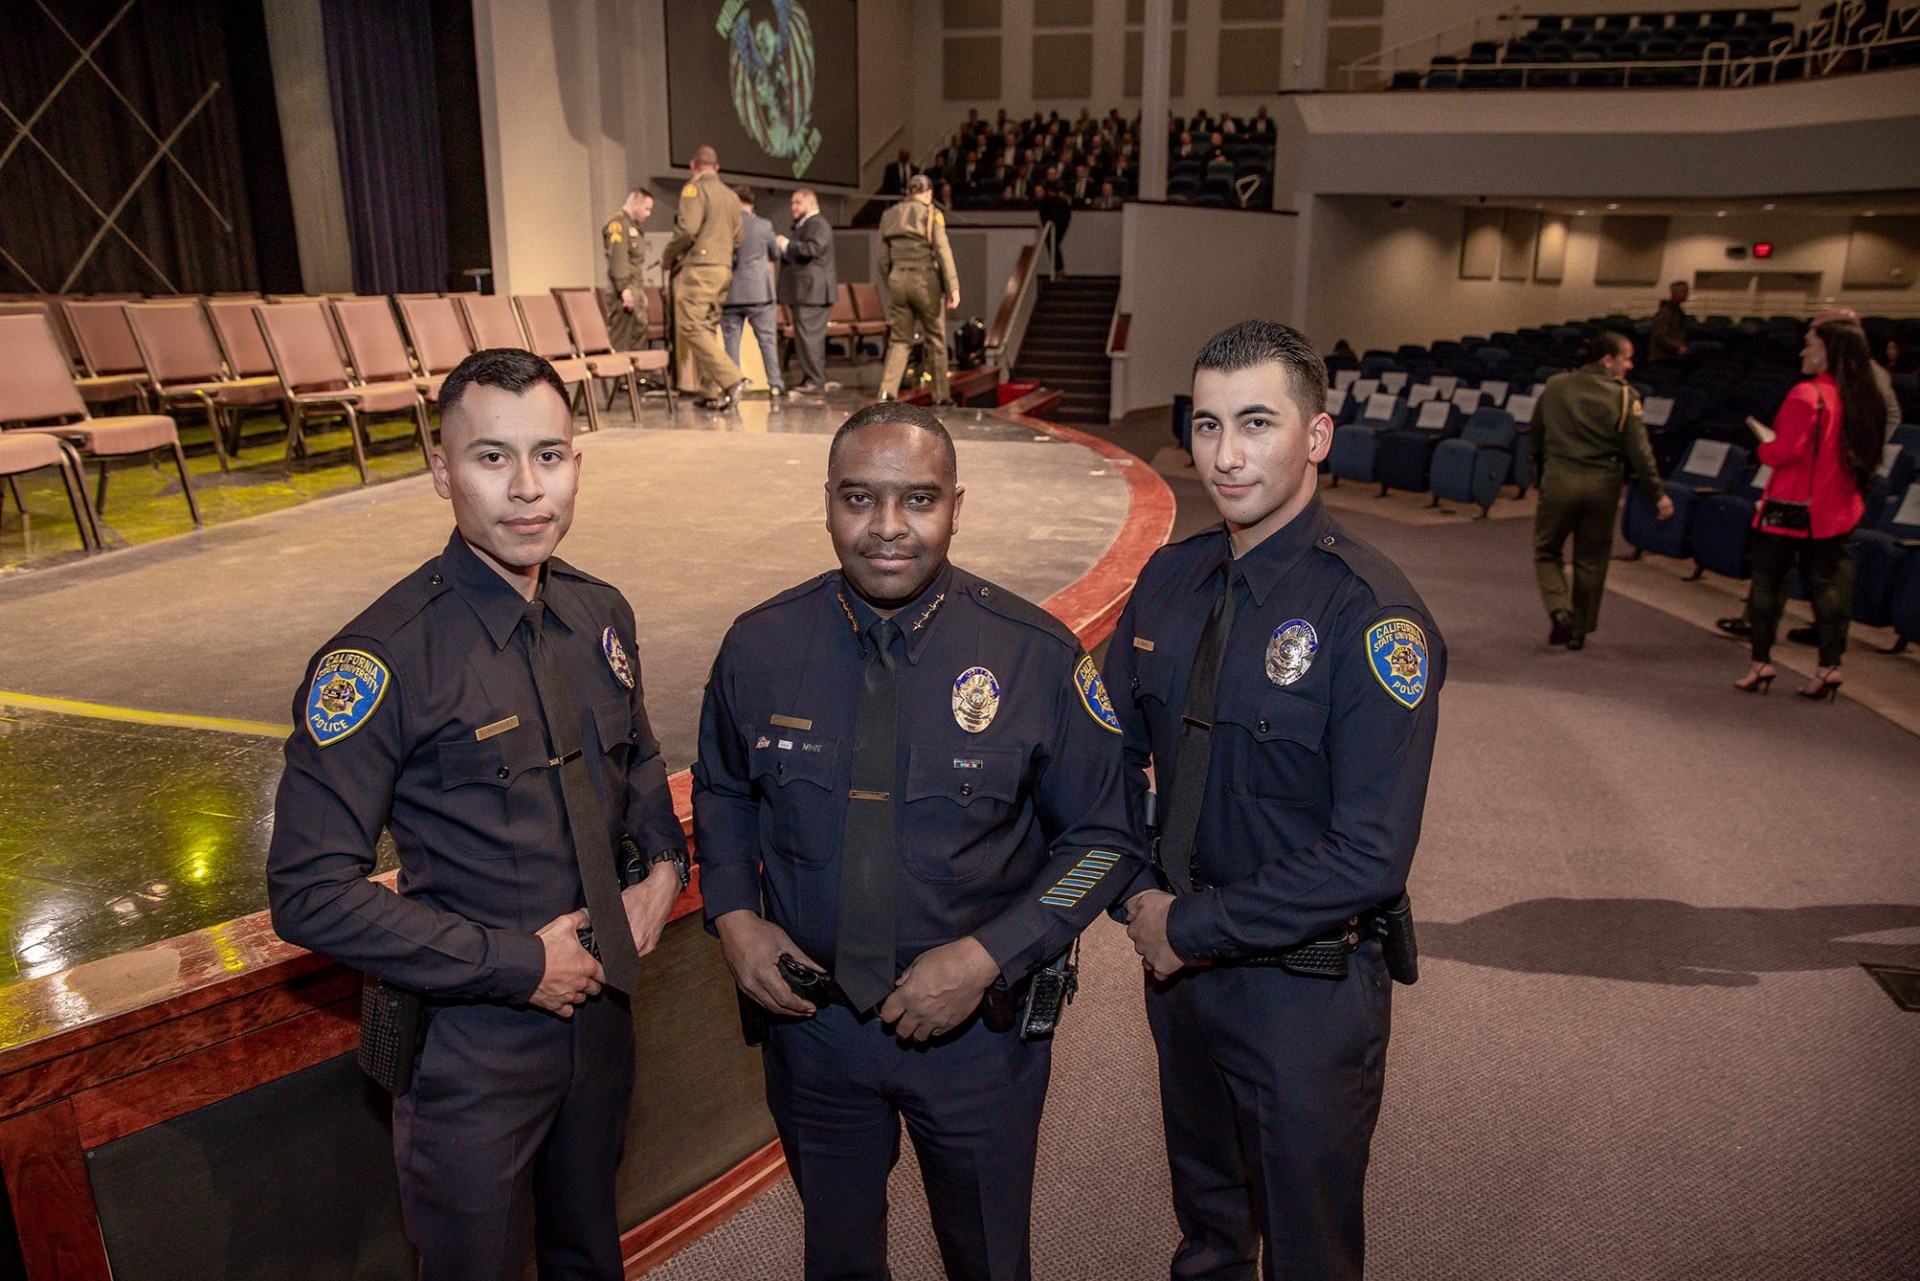 John Guttierrez (center), CSUSB acting police chief, stands with the department’s newest officers, Victor Rodriguez (left) and Raudel Garcia-Reynoso (right) at the San Bernardino County Sheriff’s Basic Academy graduation. The new officers are CSUSB graduates.